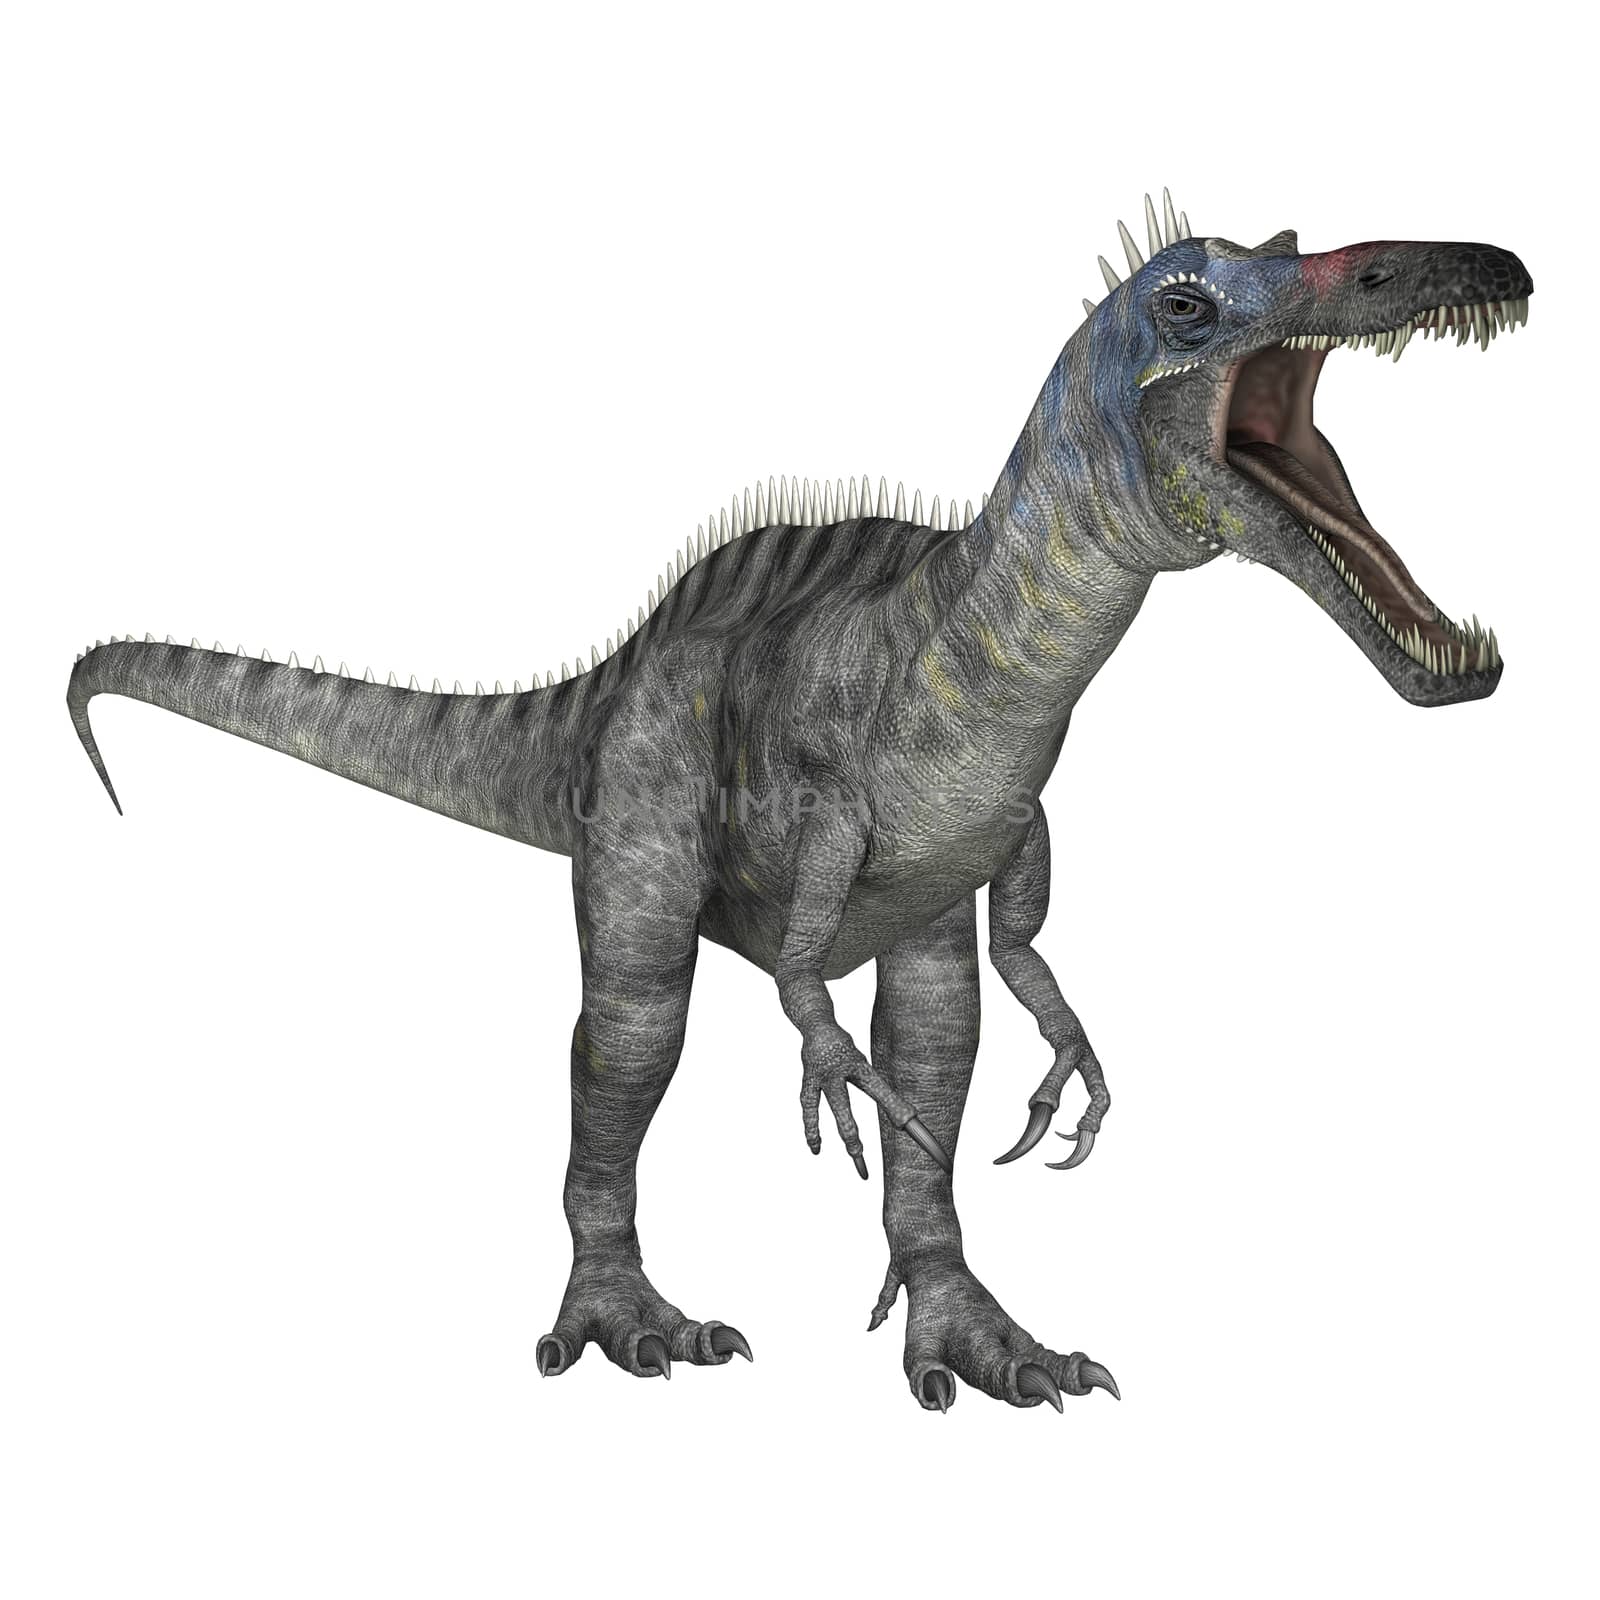 3D digital render of a dinosaur Suchomimus or Suchomimus tenerensis isolated on white background